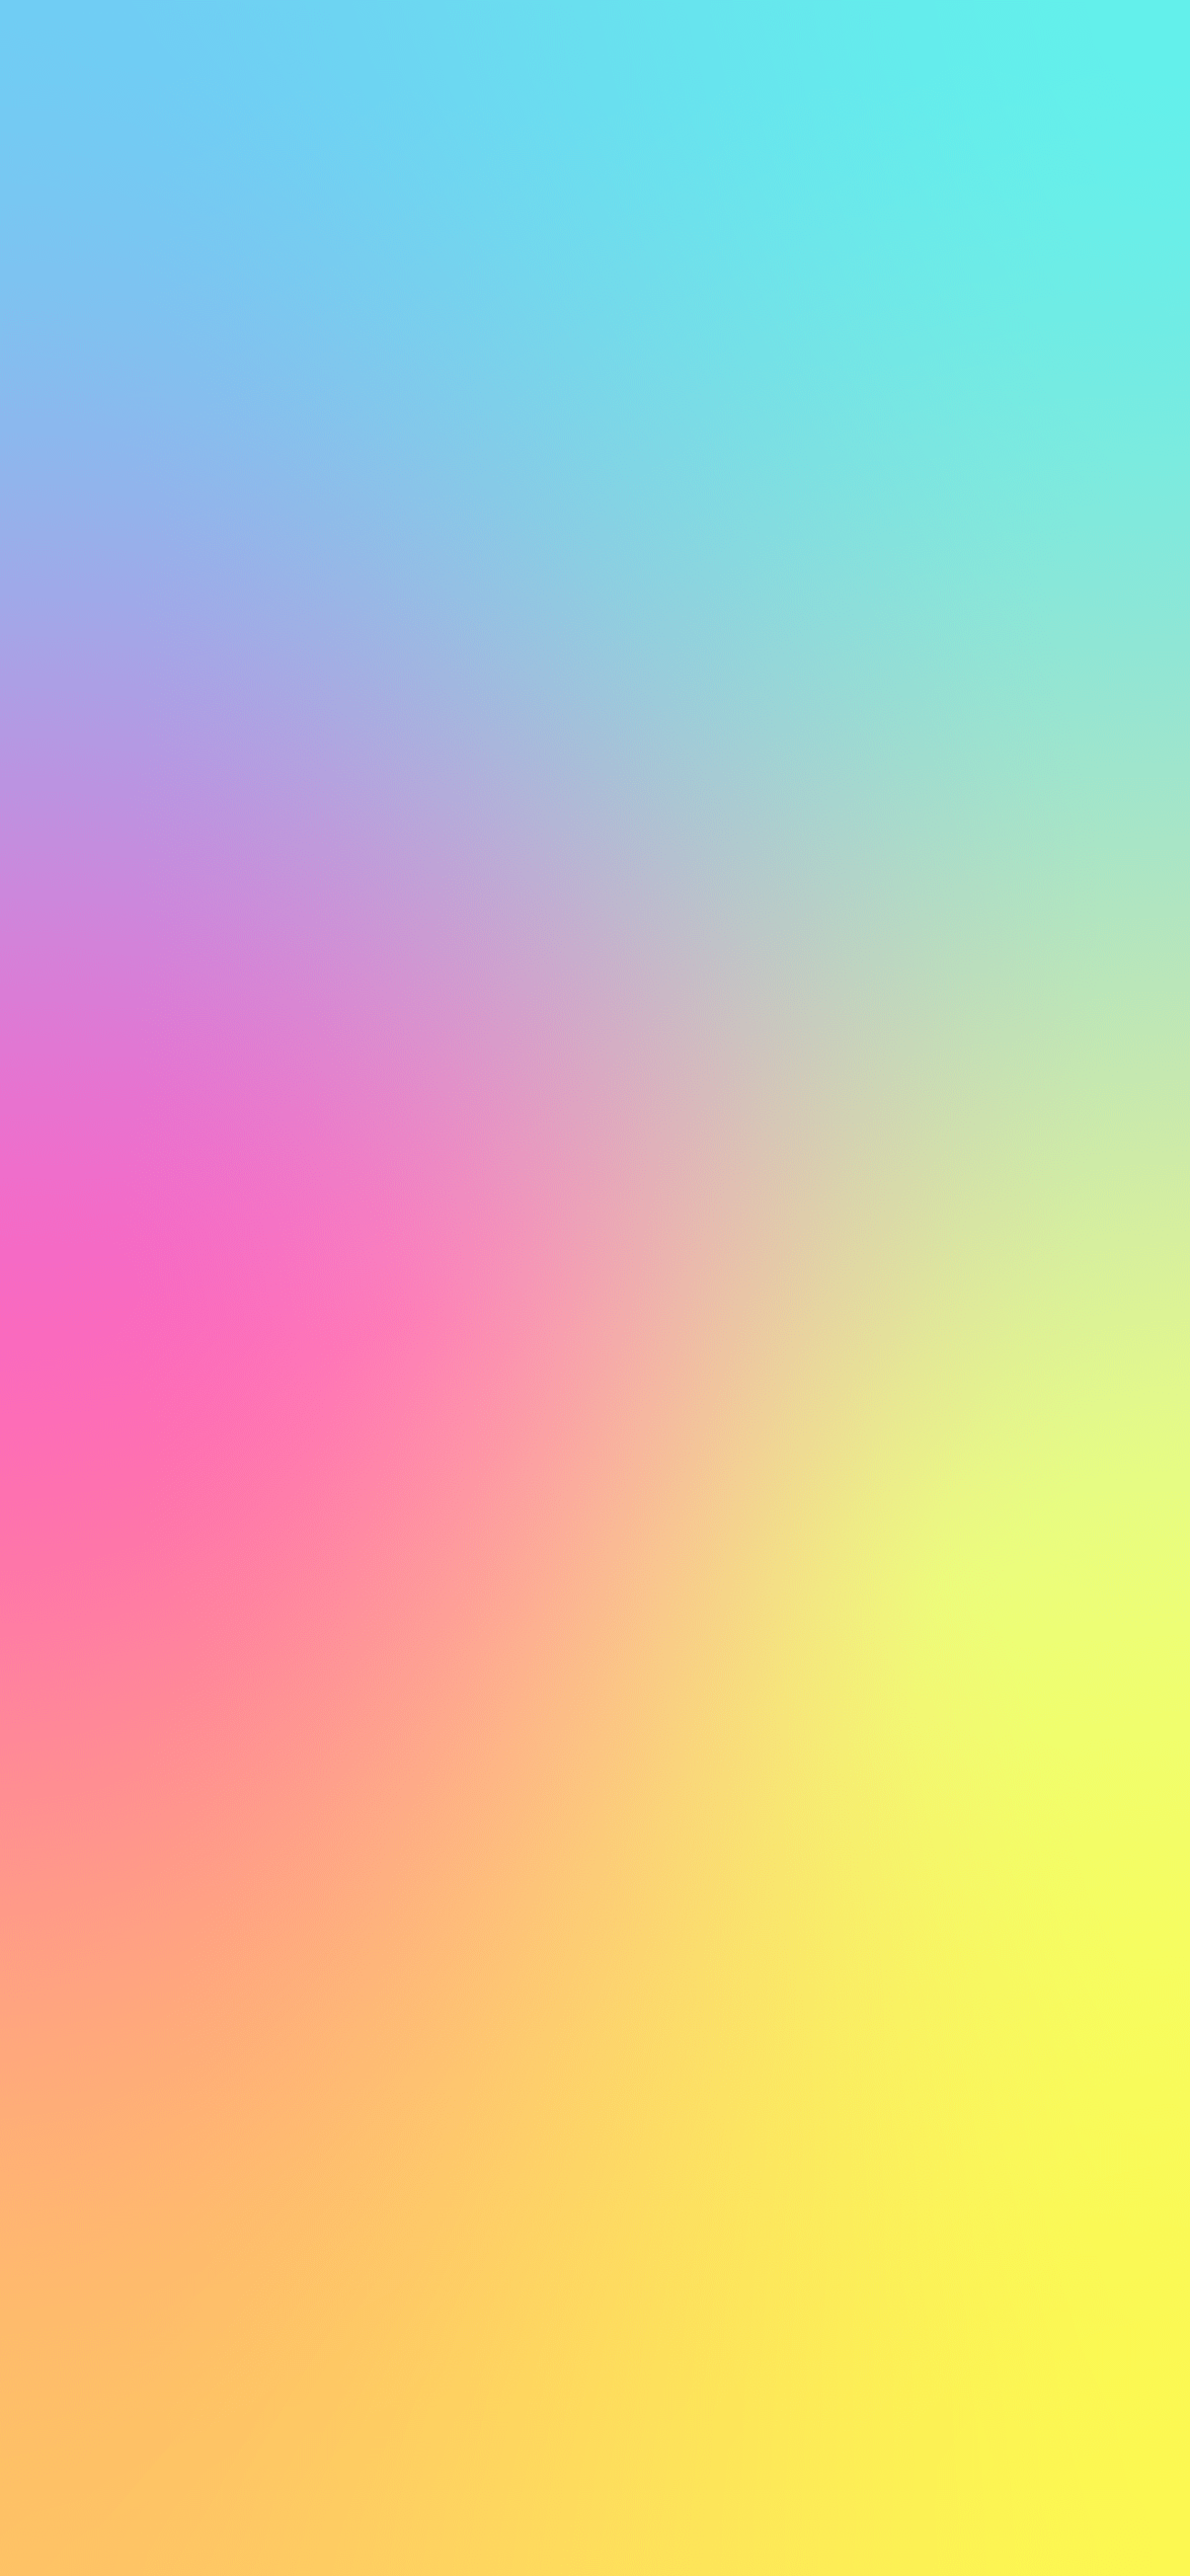 Cool gradient wallpaper for phone